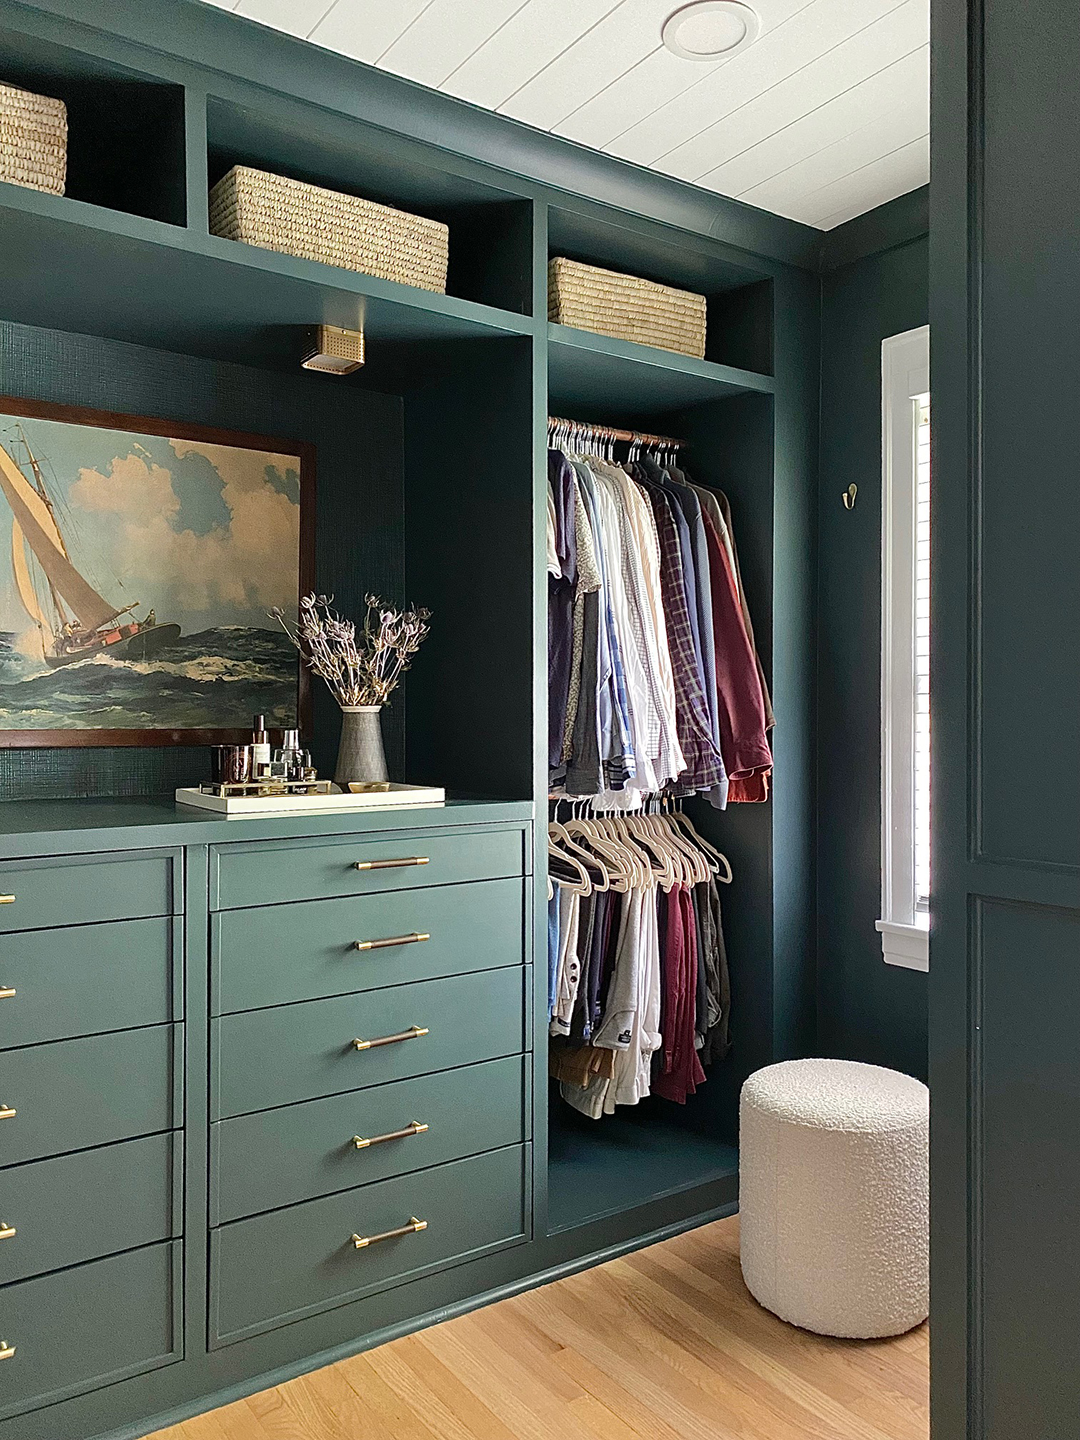 IKEA Storage Hacks for Homes That Need an Extra Closet